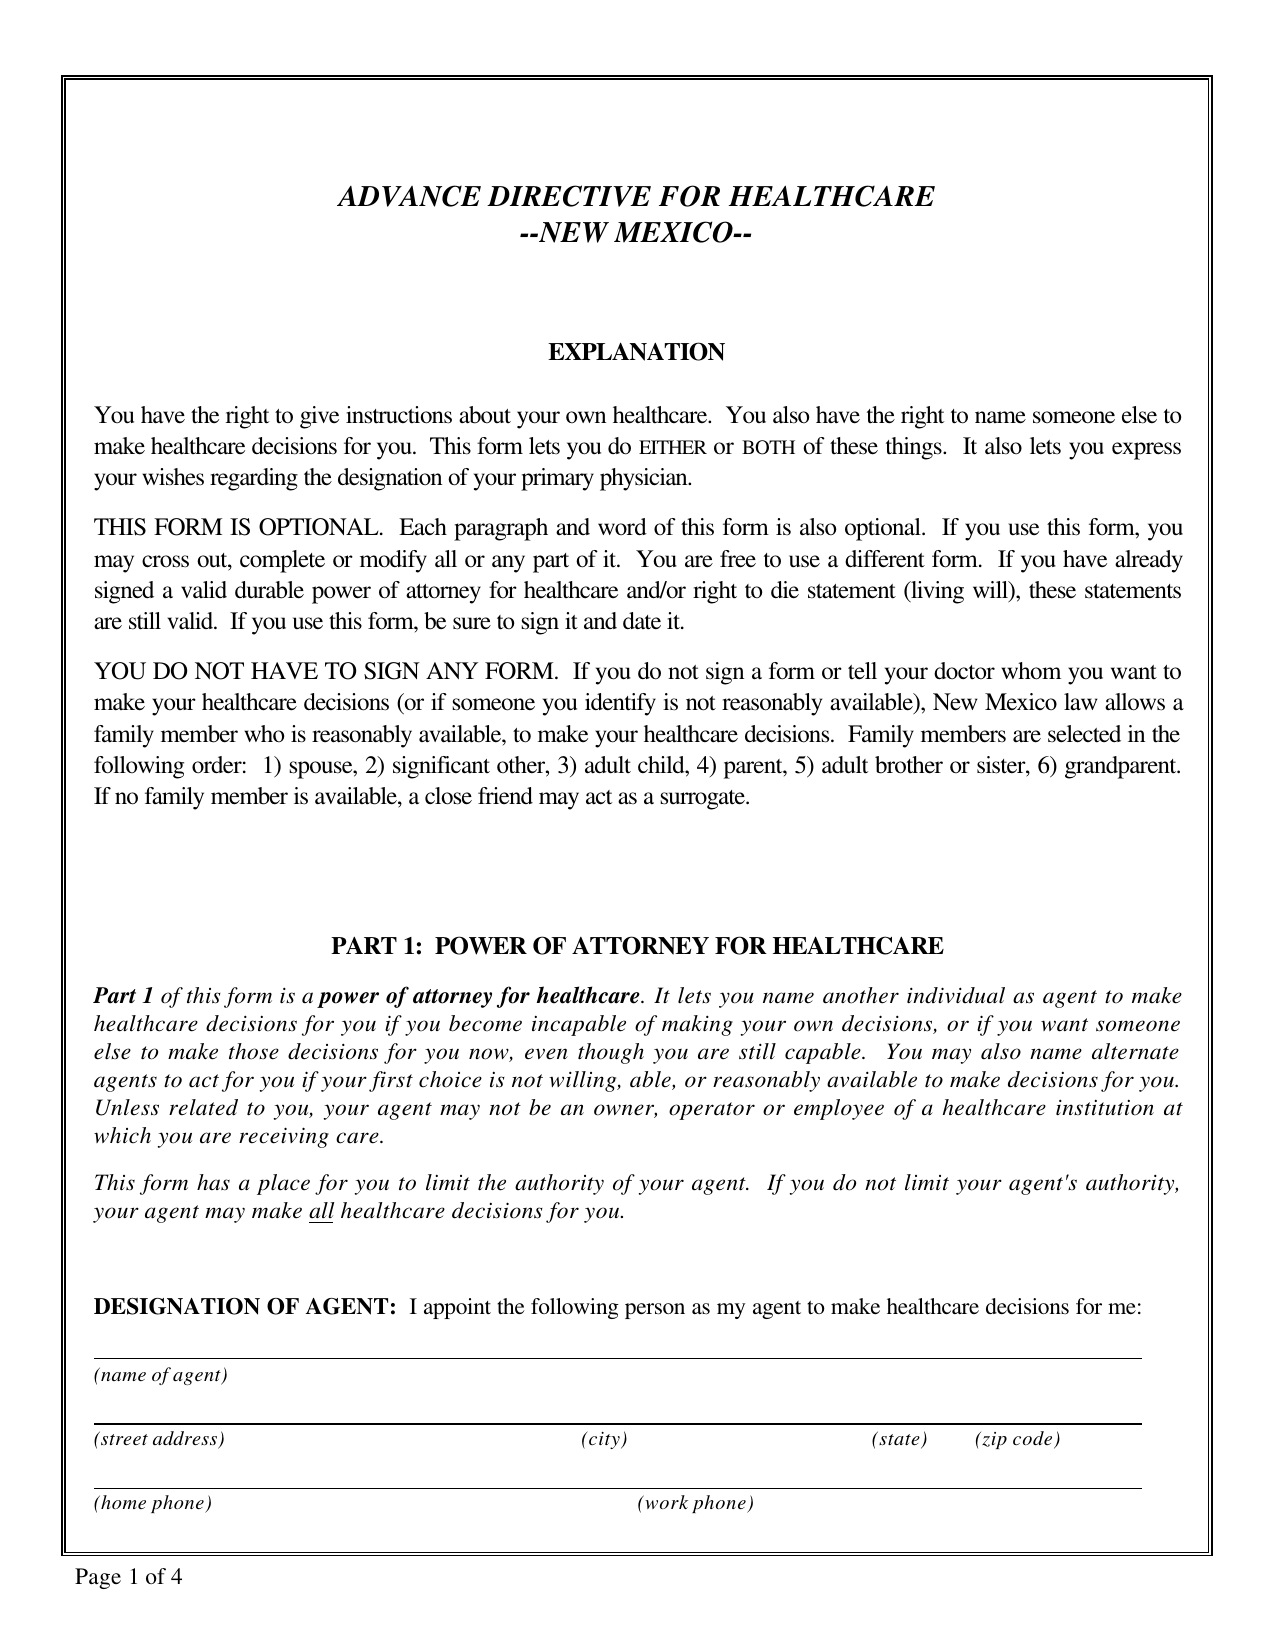 download-new-mexico-living-will-form-advance-directive-pdf